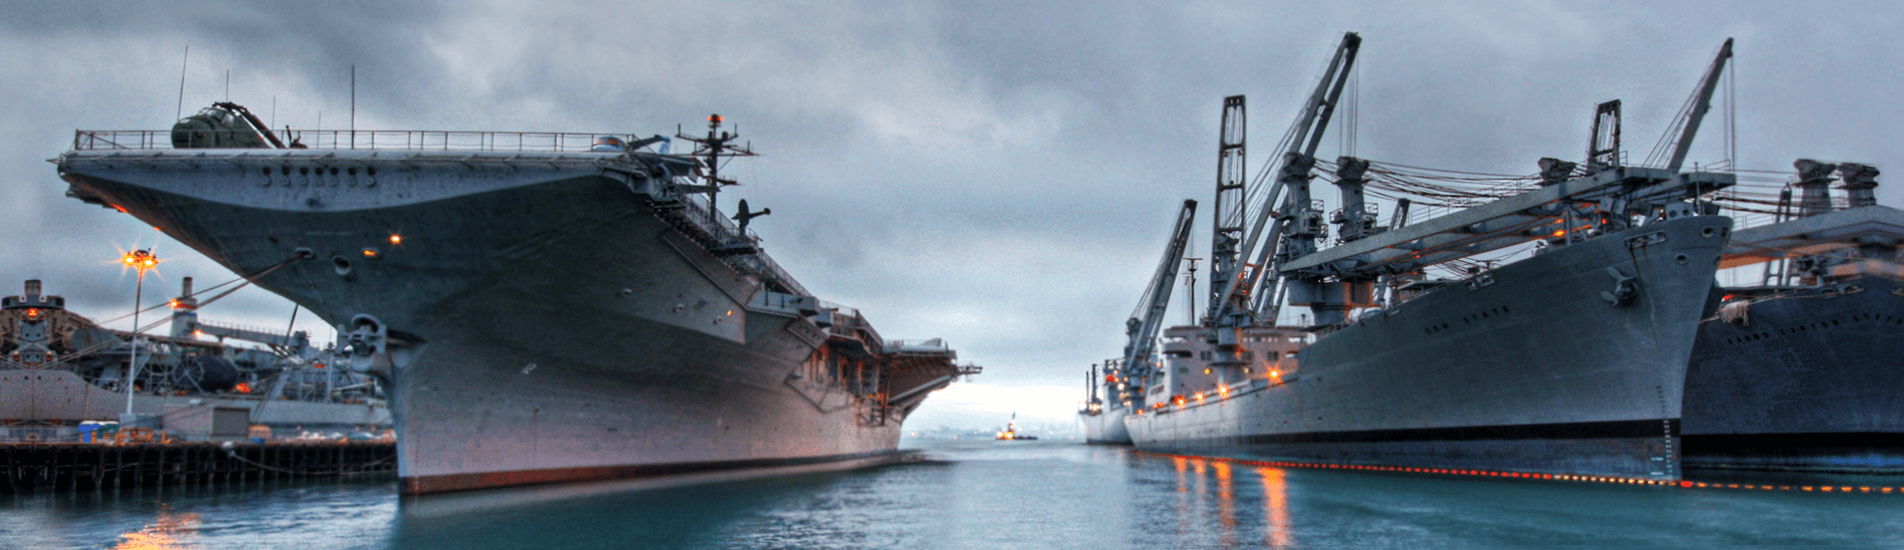 Military Ships in Port - SynDeck Marine Underlayments and Deck Coatings